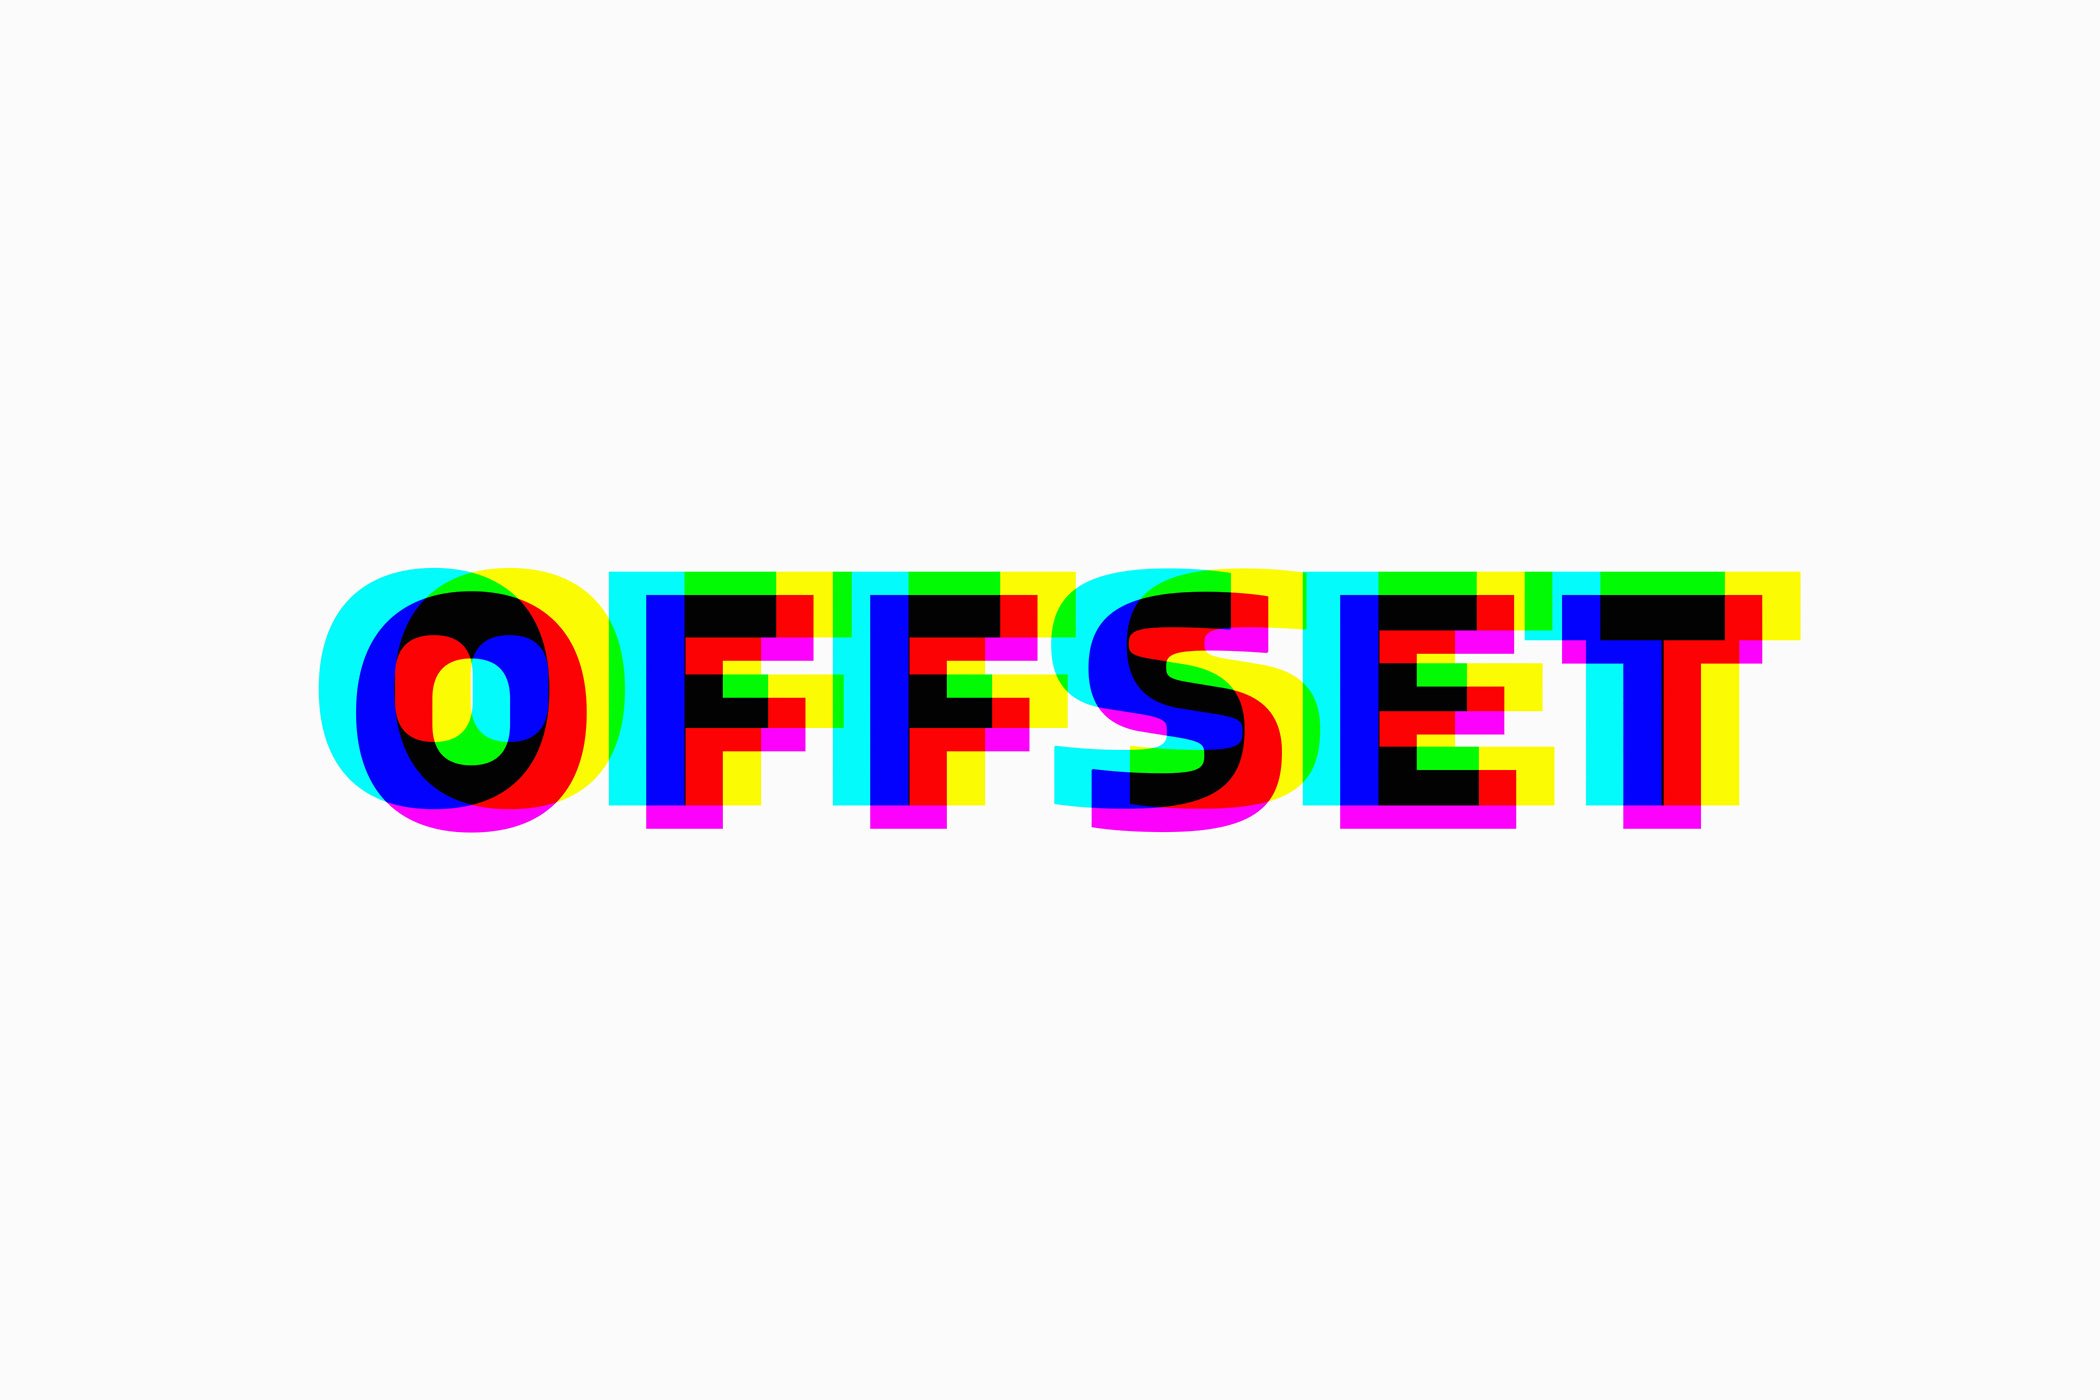 Anaglyphic Stereo Text Effectpreview image.